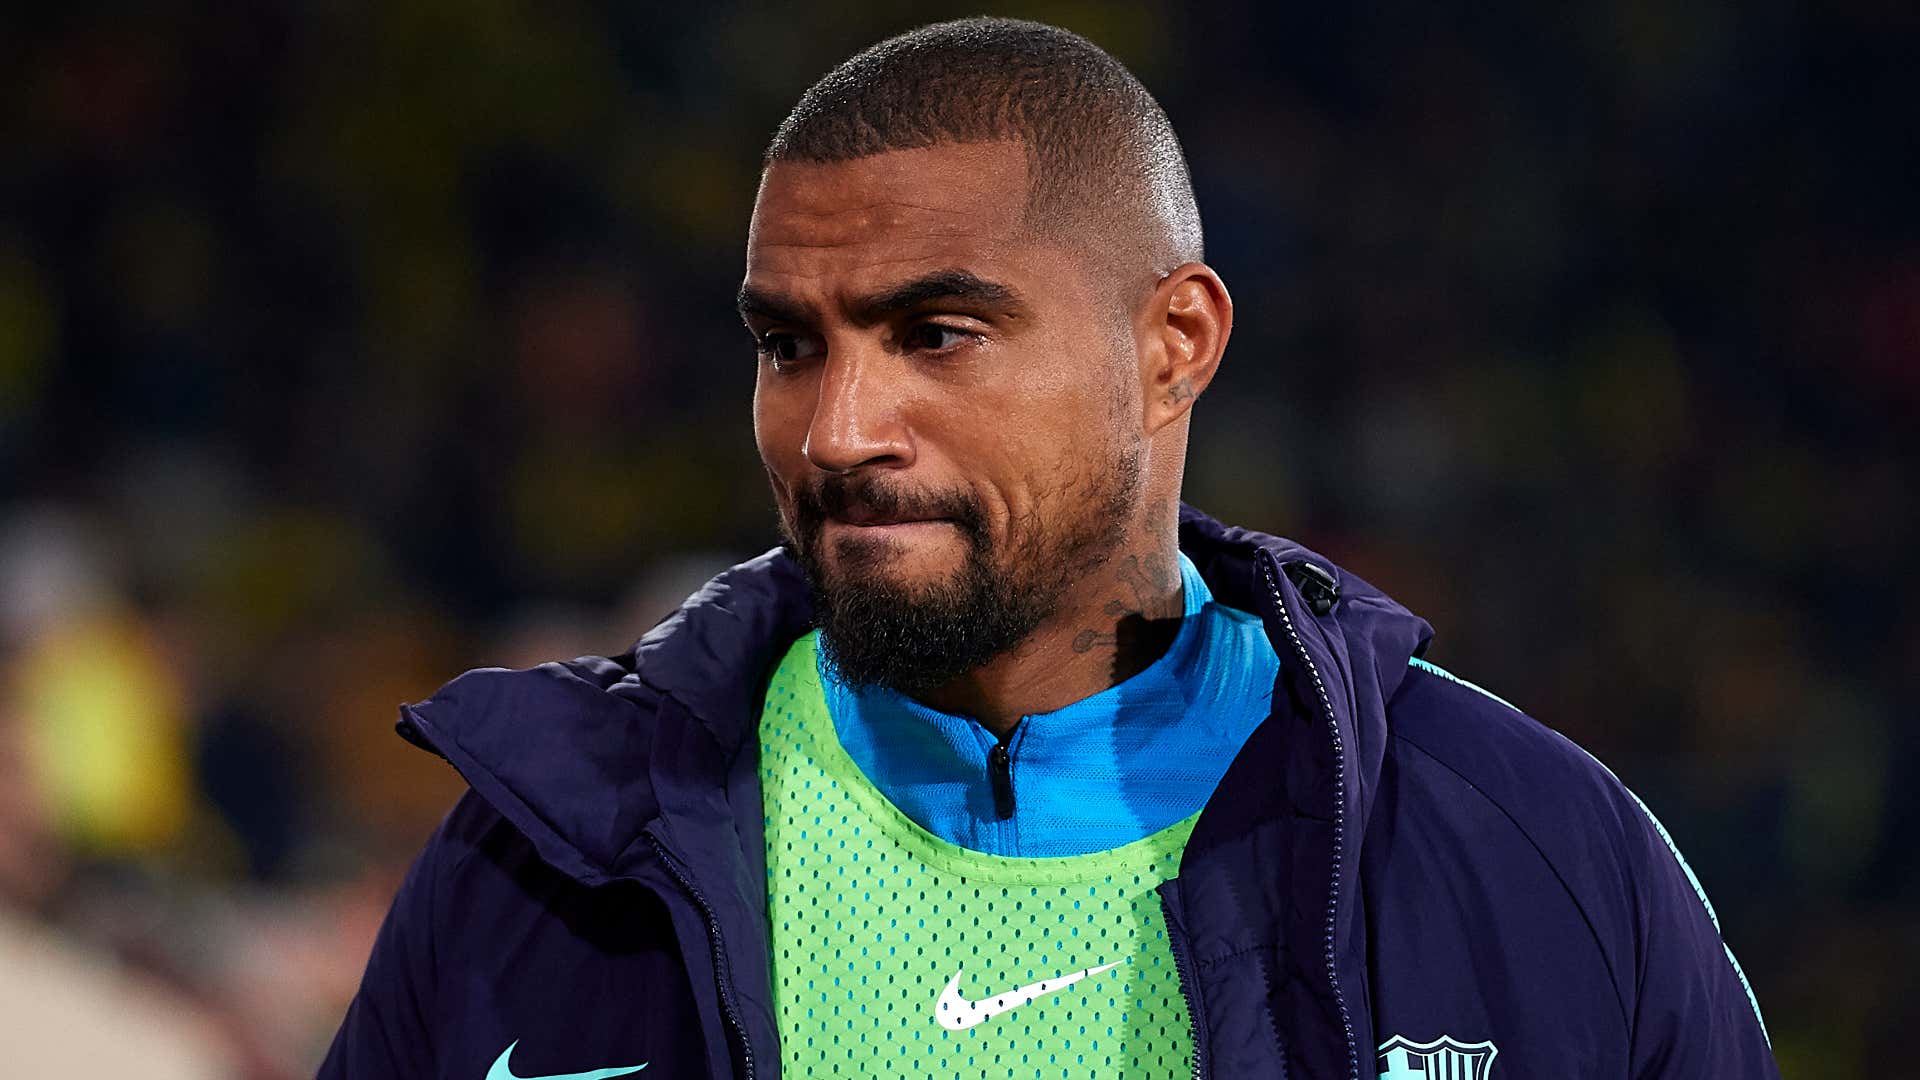 Photo of KP Boateng: Ghana star untouched as Hertha account for Borussia Monchengladbach